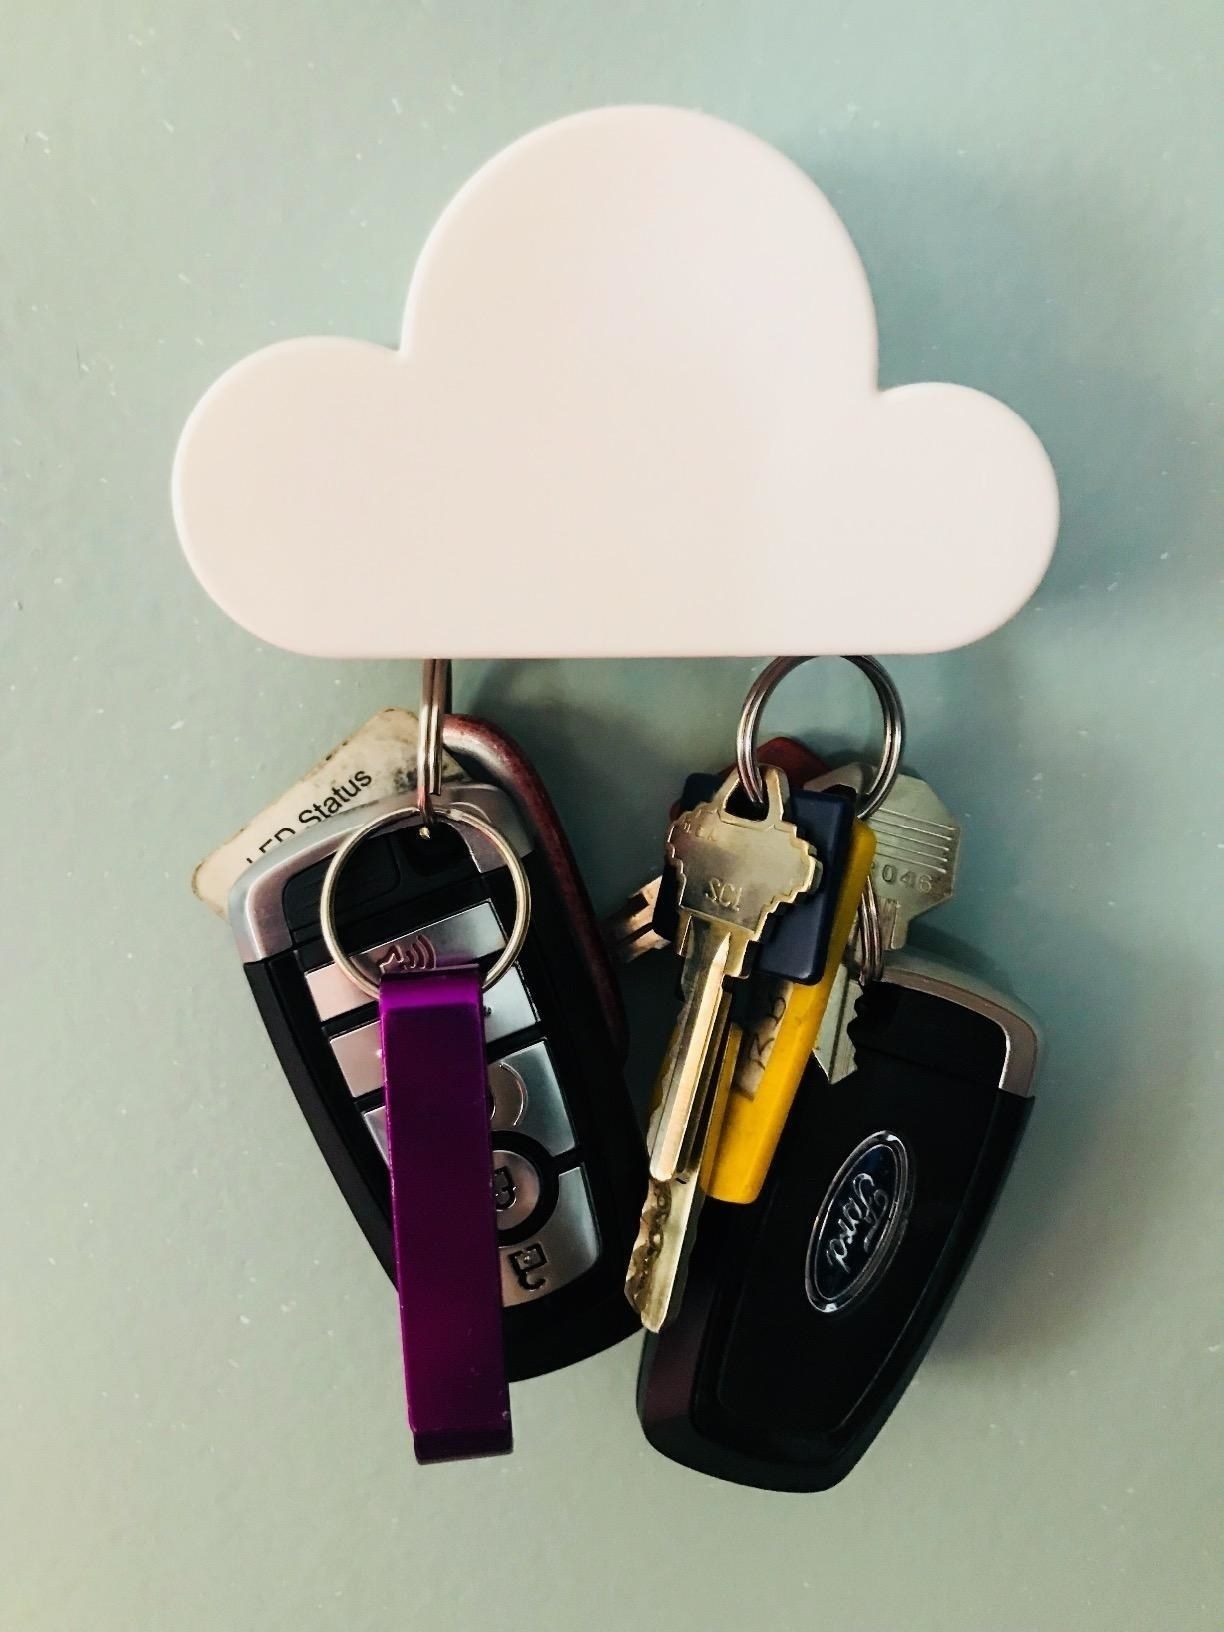 reviewer showing two sets of keys magnetically attached to a cloud-shaped key holder